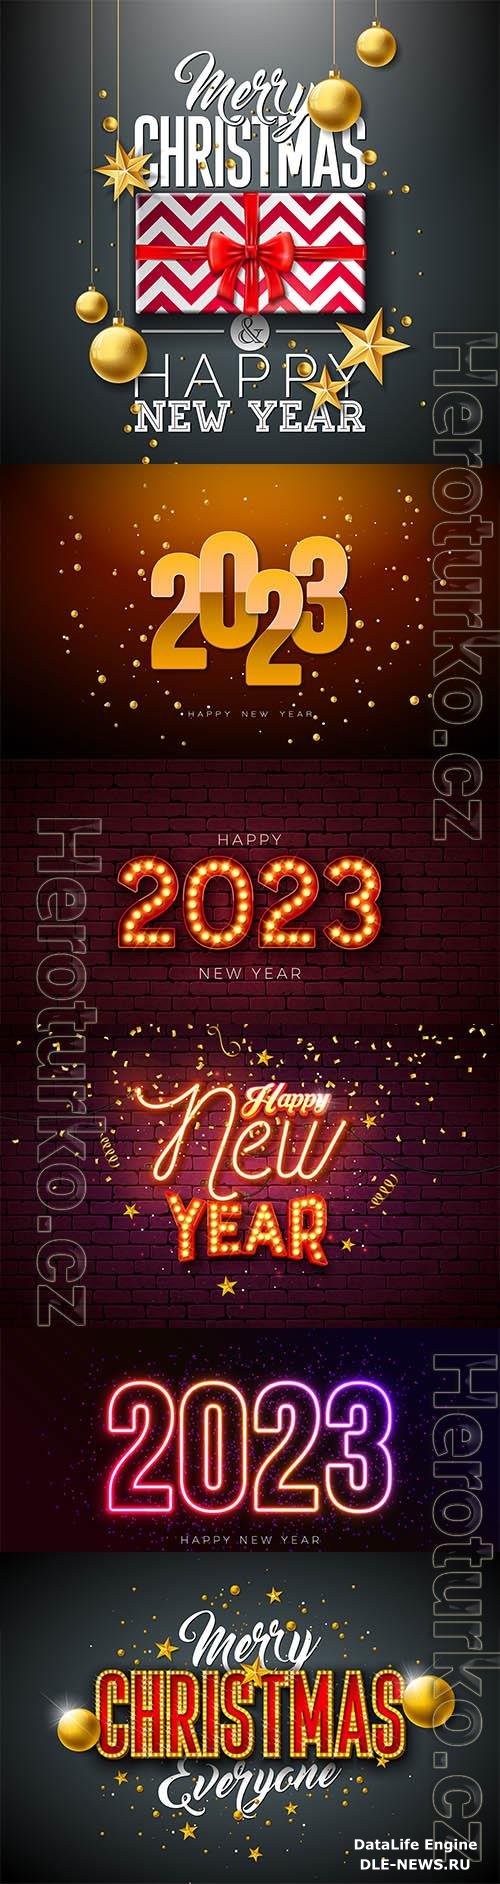 Happy new year 2023 illustration with gold ornamental ball and falling confetti on shiny background